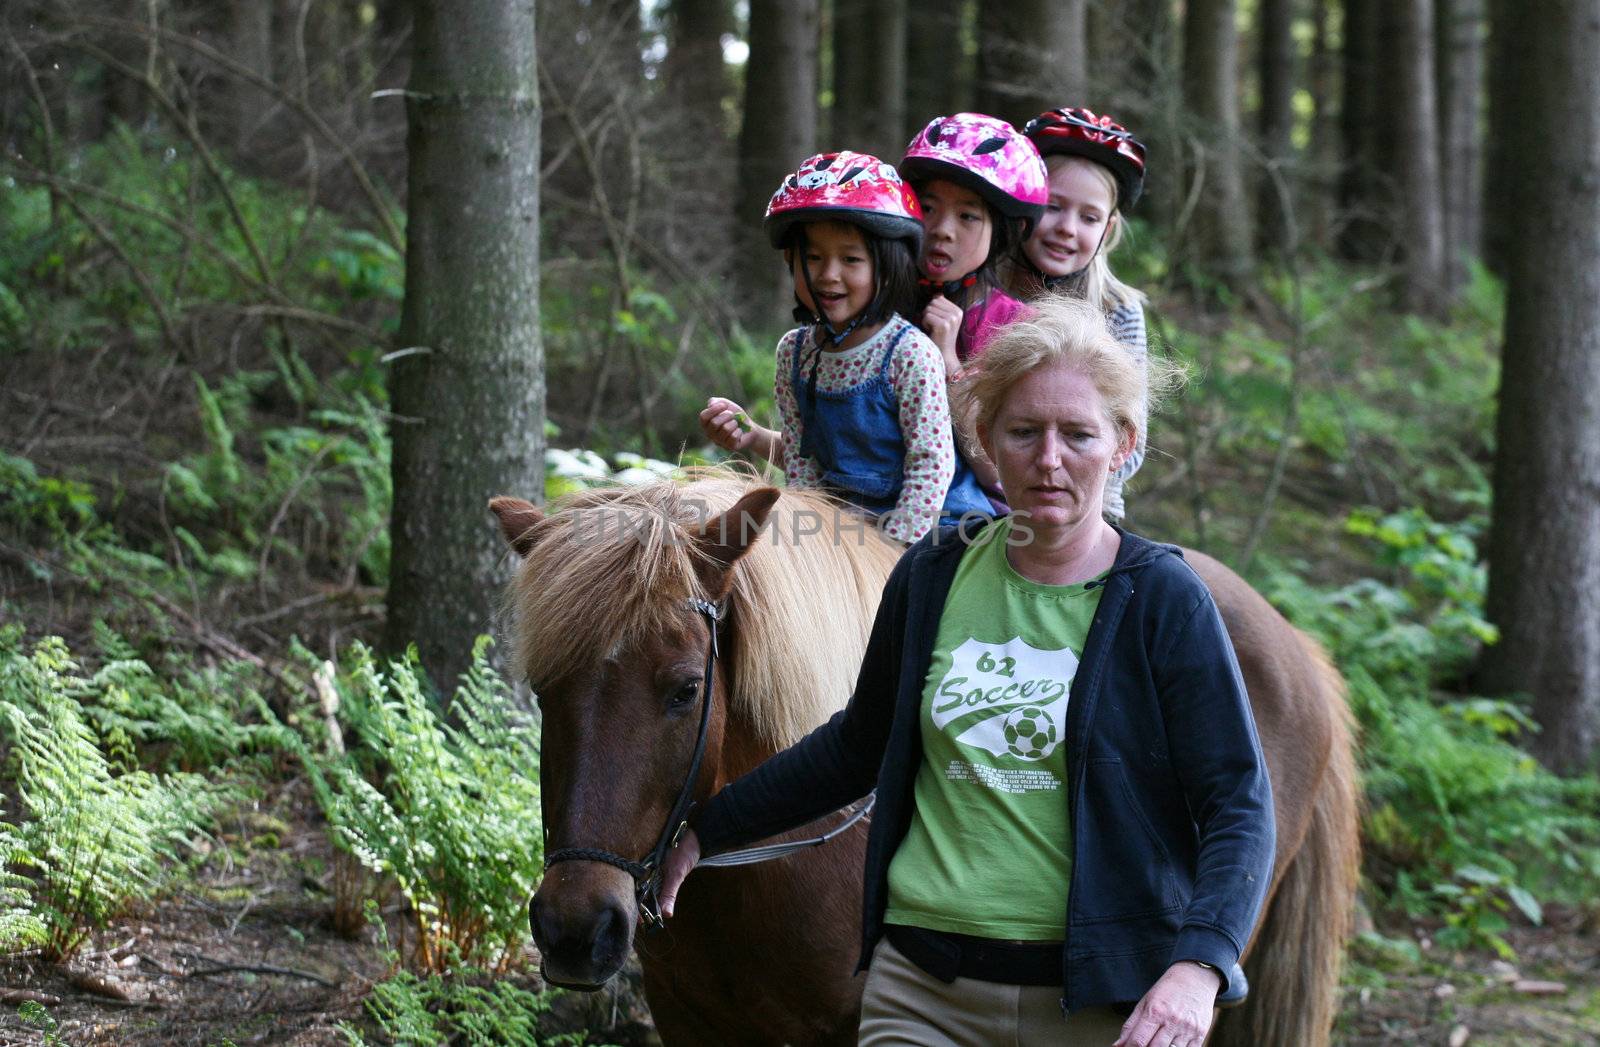 Girls on horse in a forest in denmark